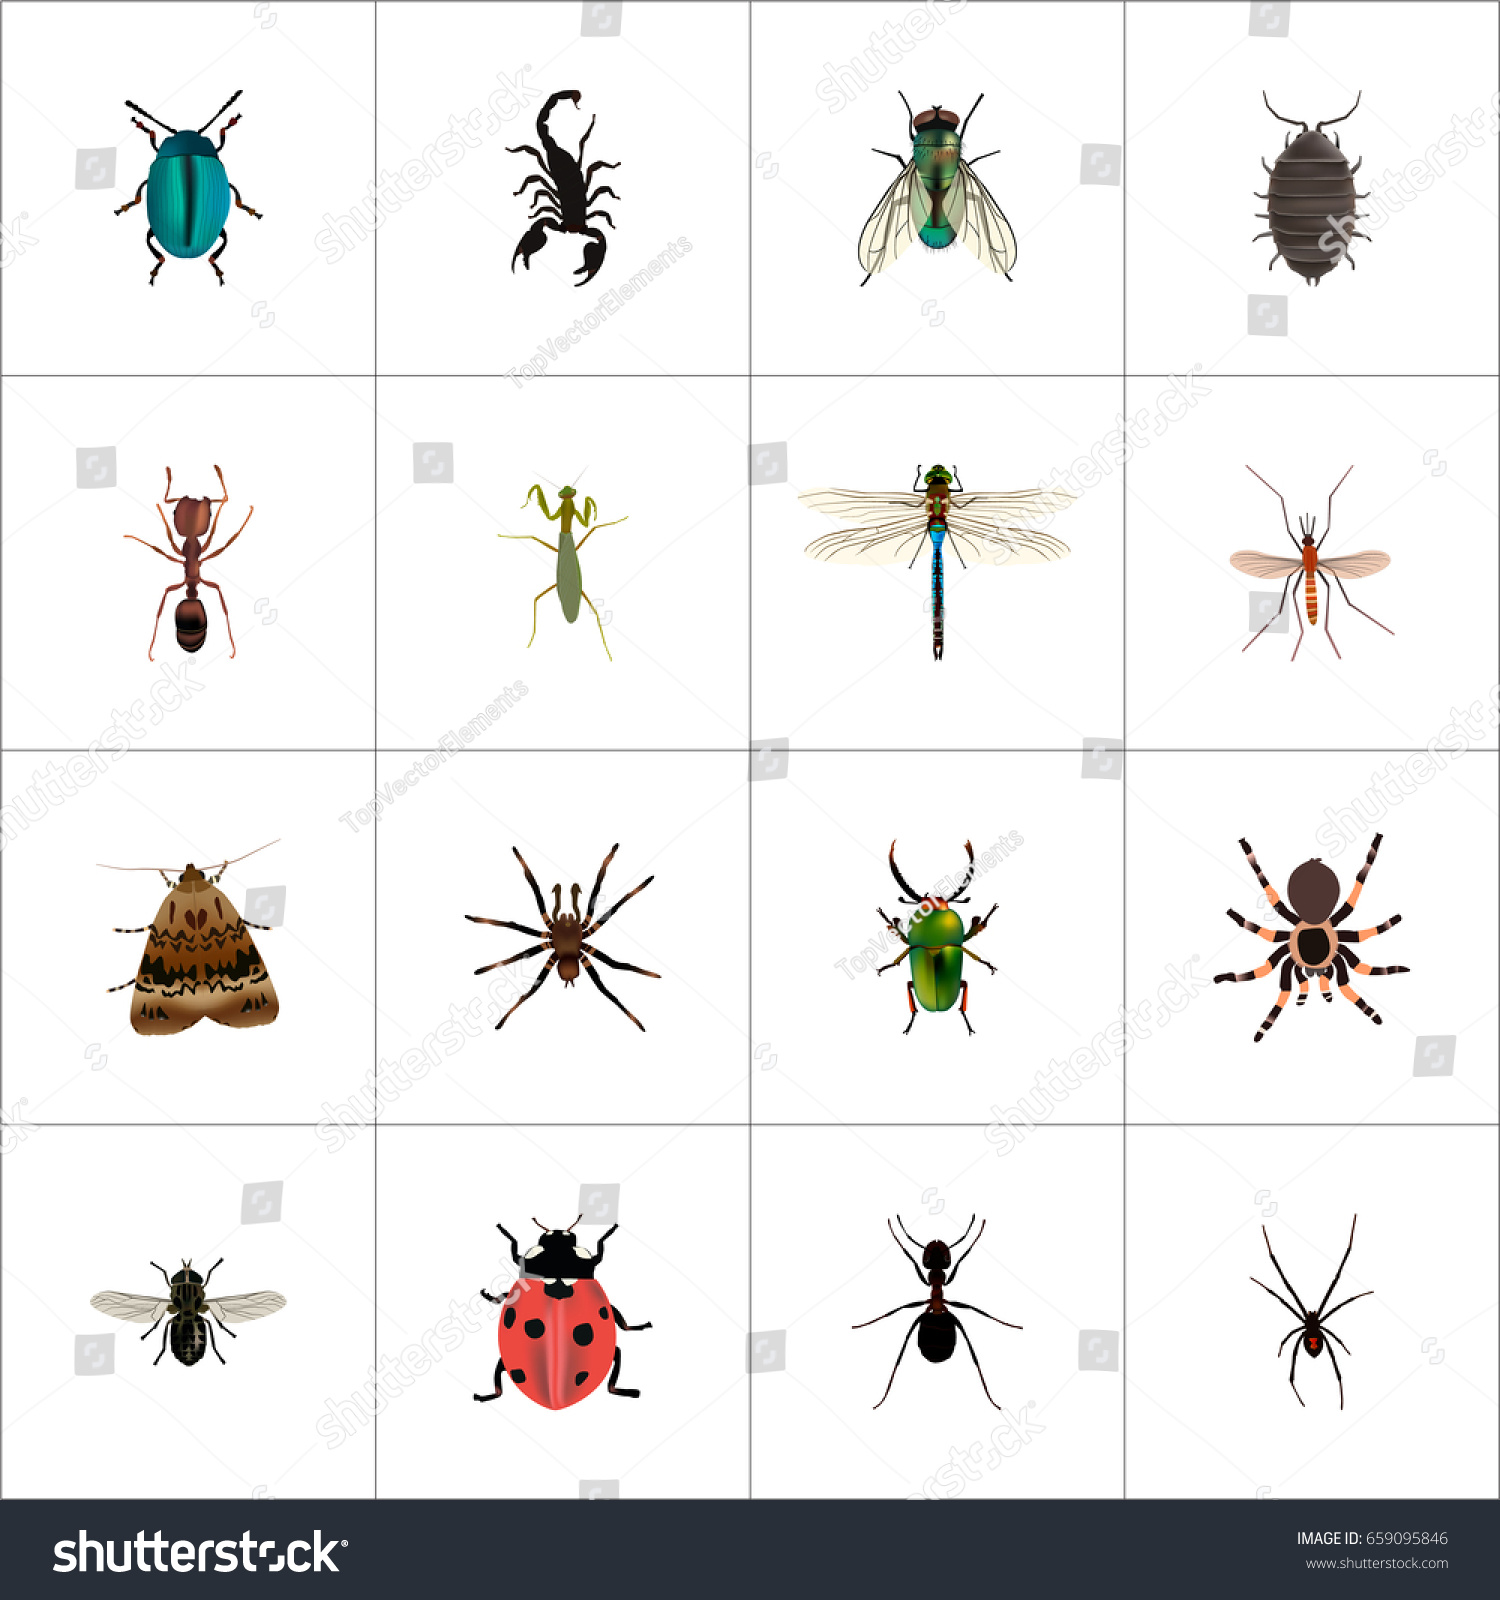 SVG of Realistic Dor, Damselfly, Housefly And Other Vector Elements. Set Of Bug Realistic Symbols Also Includes Insect, Spider, Dor Objects. svg